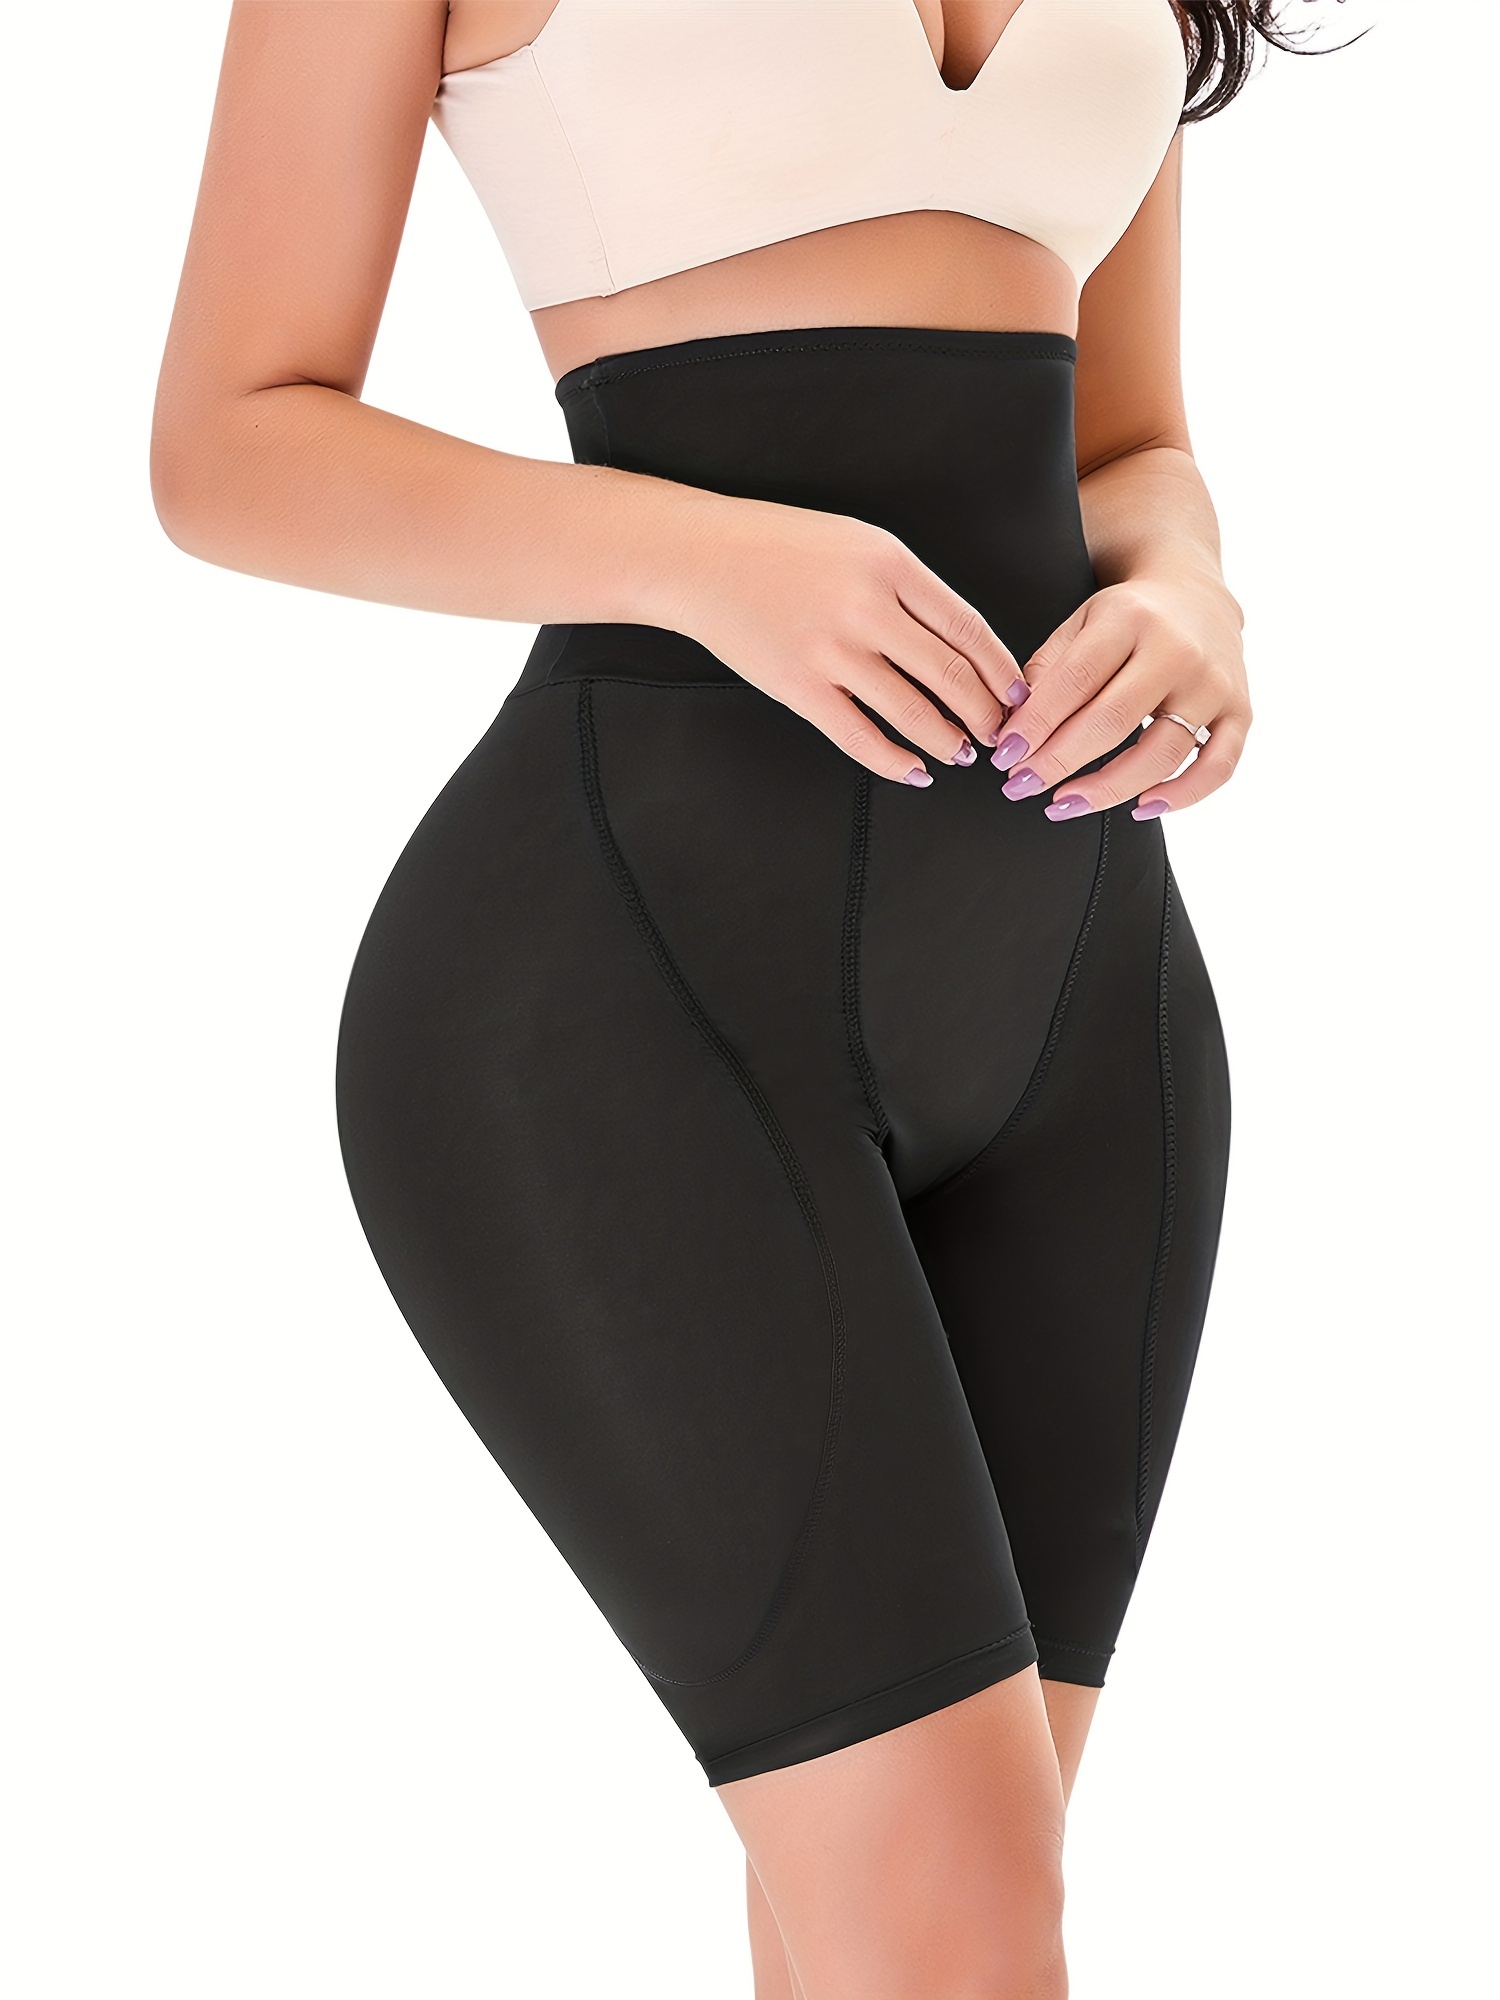 1pc Women's 3-In-1 High-Waist Shapewear Legging, Waist Trainer, Anti- Cellulite Thigh Slimmers For Workout